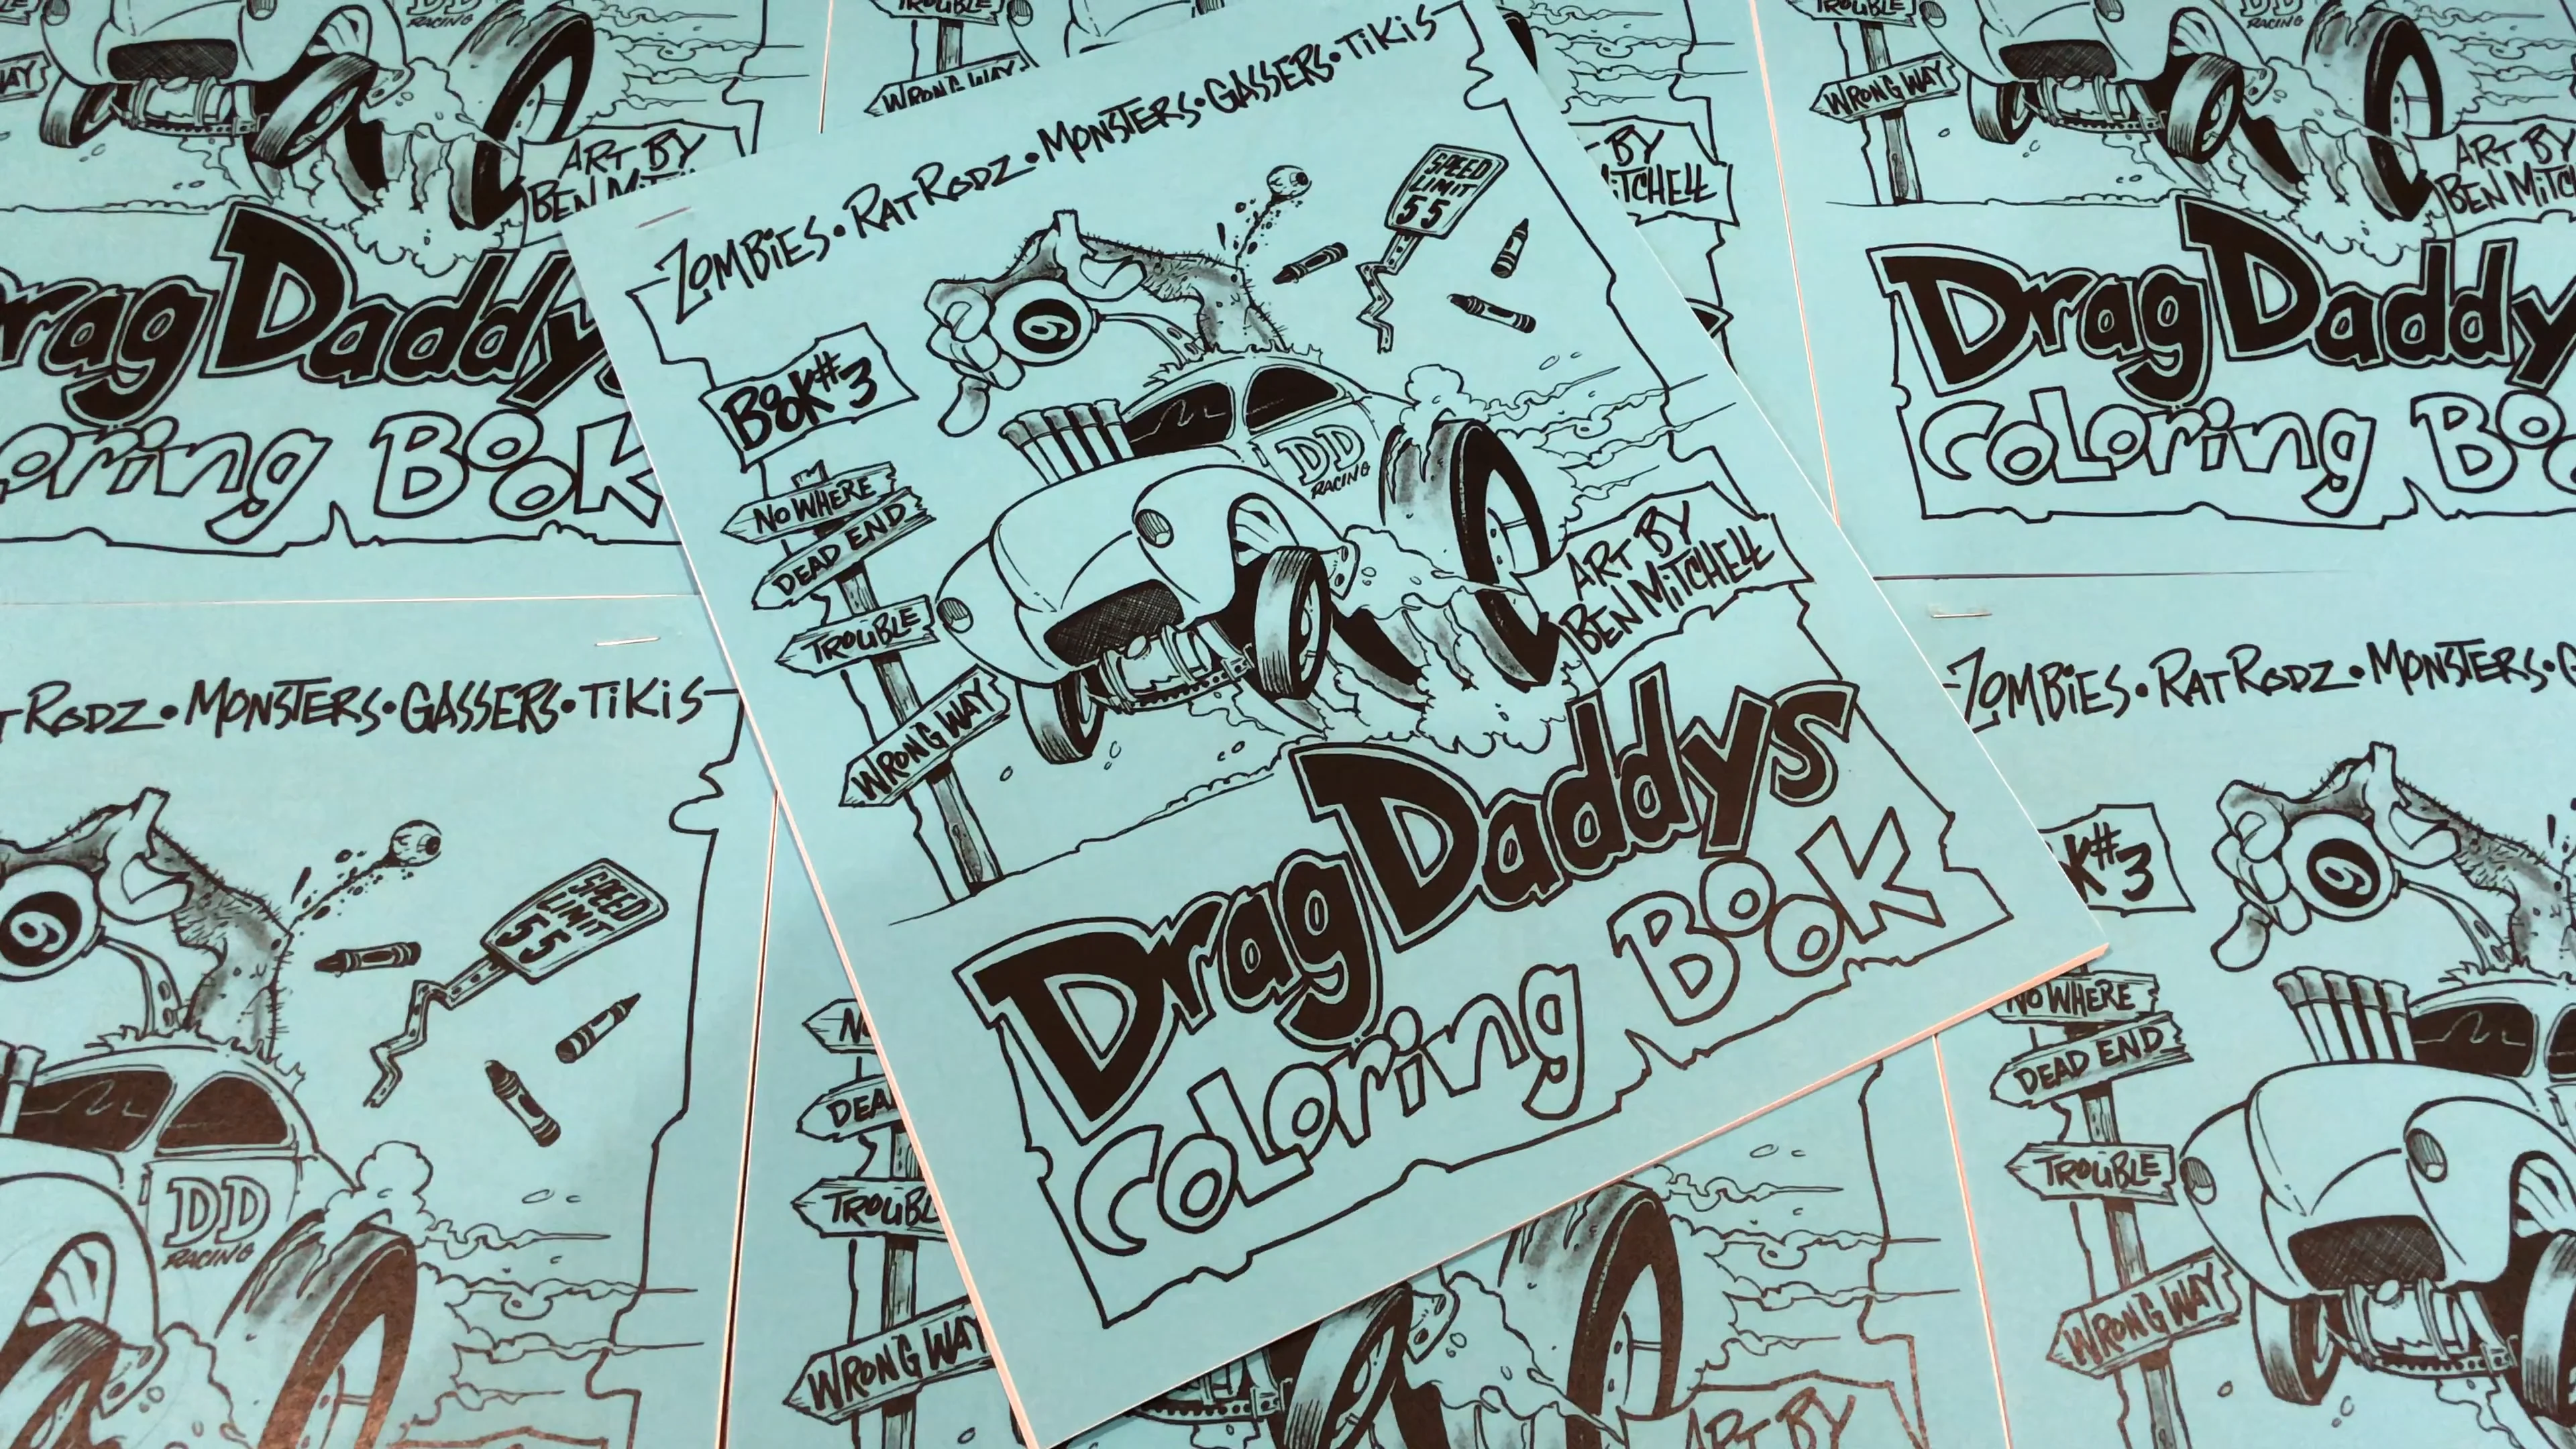 Drag Daddy's Coloring Book #3 on Vimeo